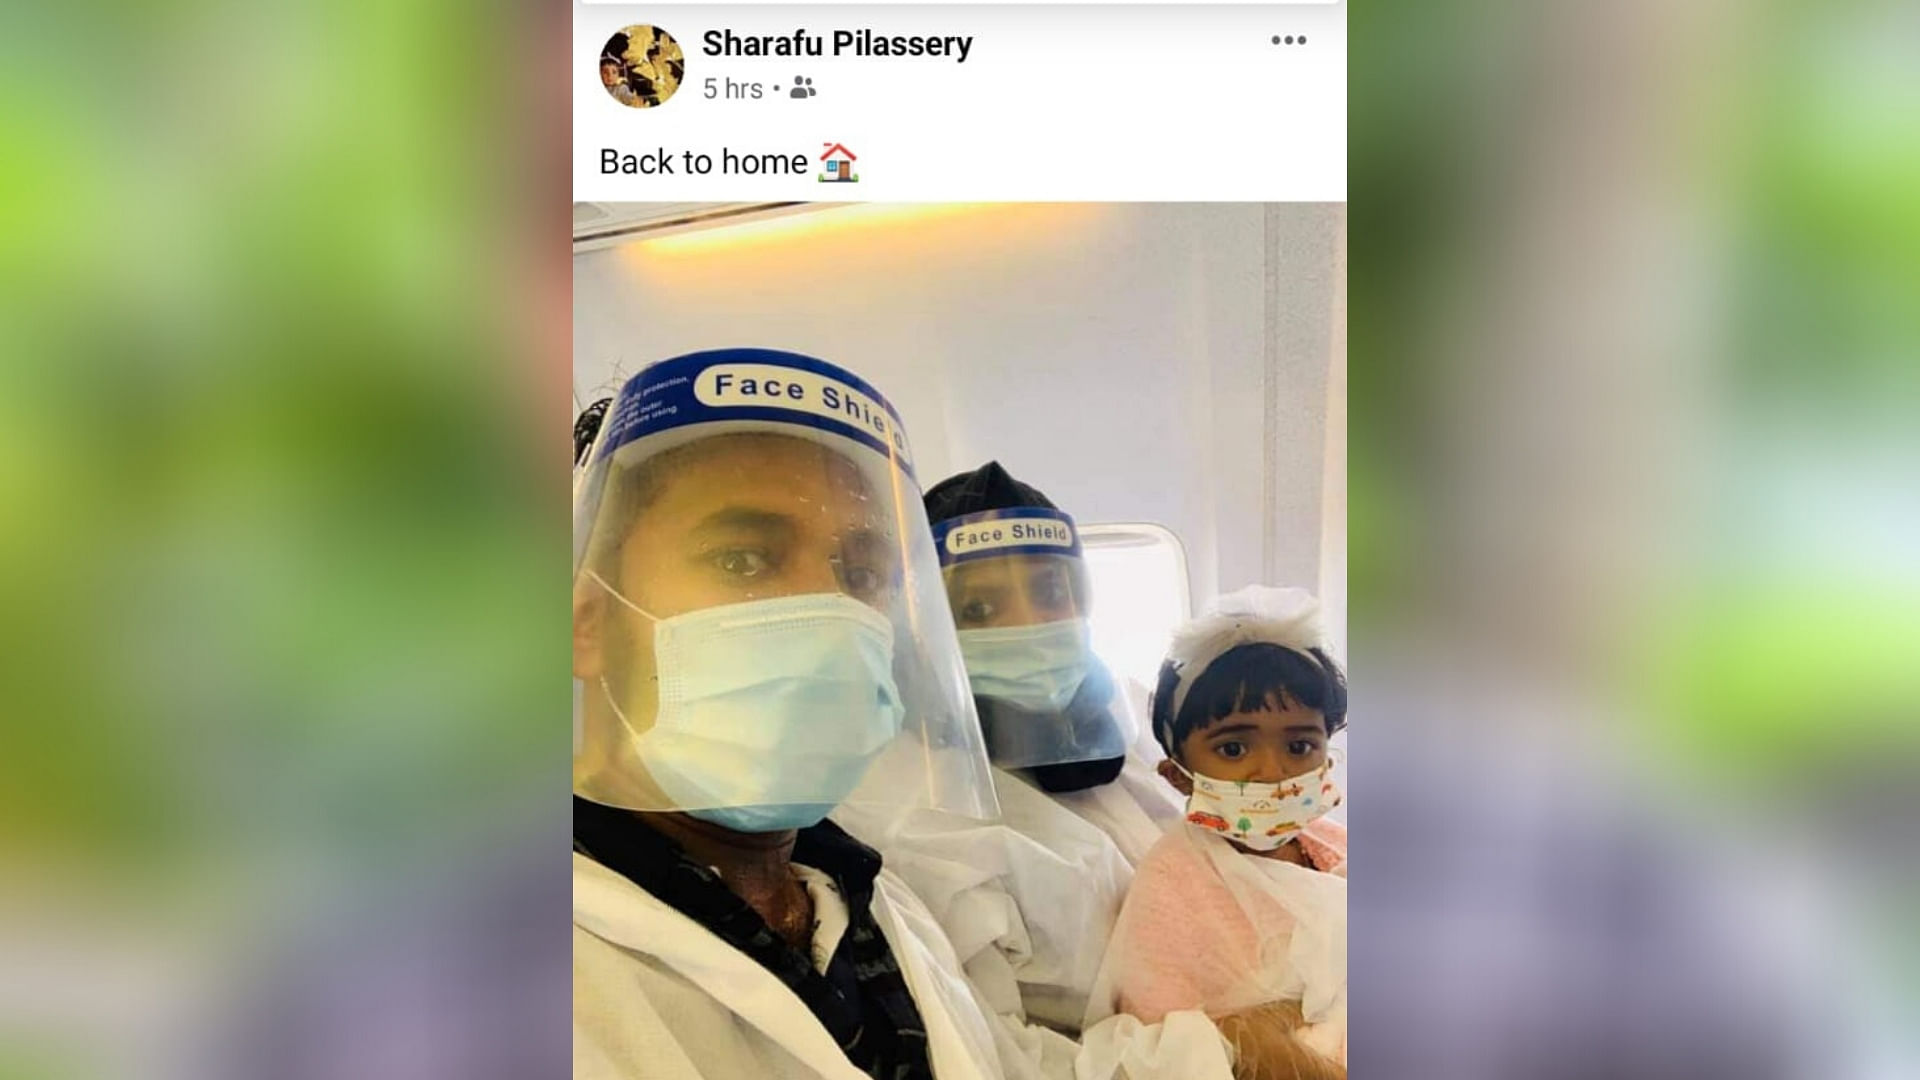 When Sharafu Pilassery left Dubai with his child and wife, he was excited to return home.